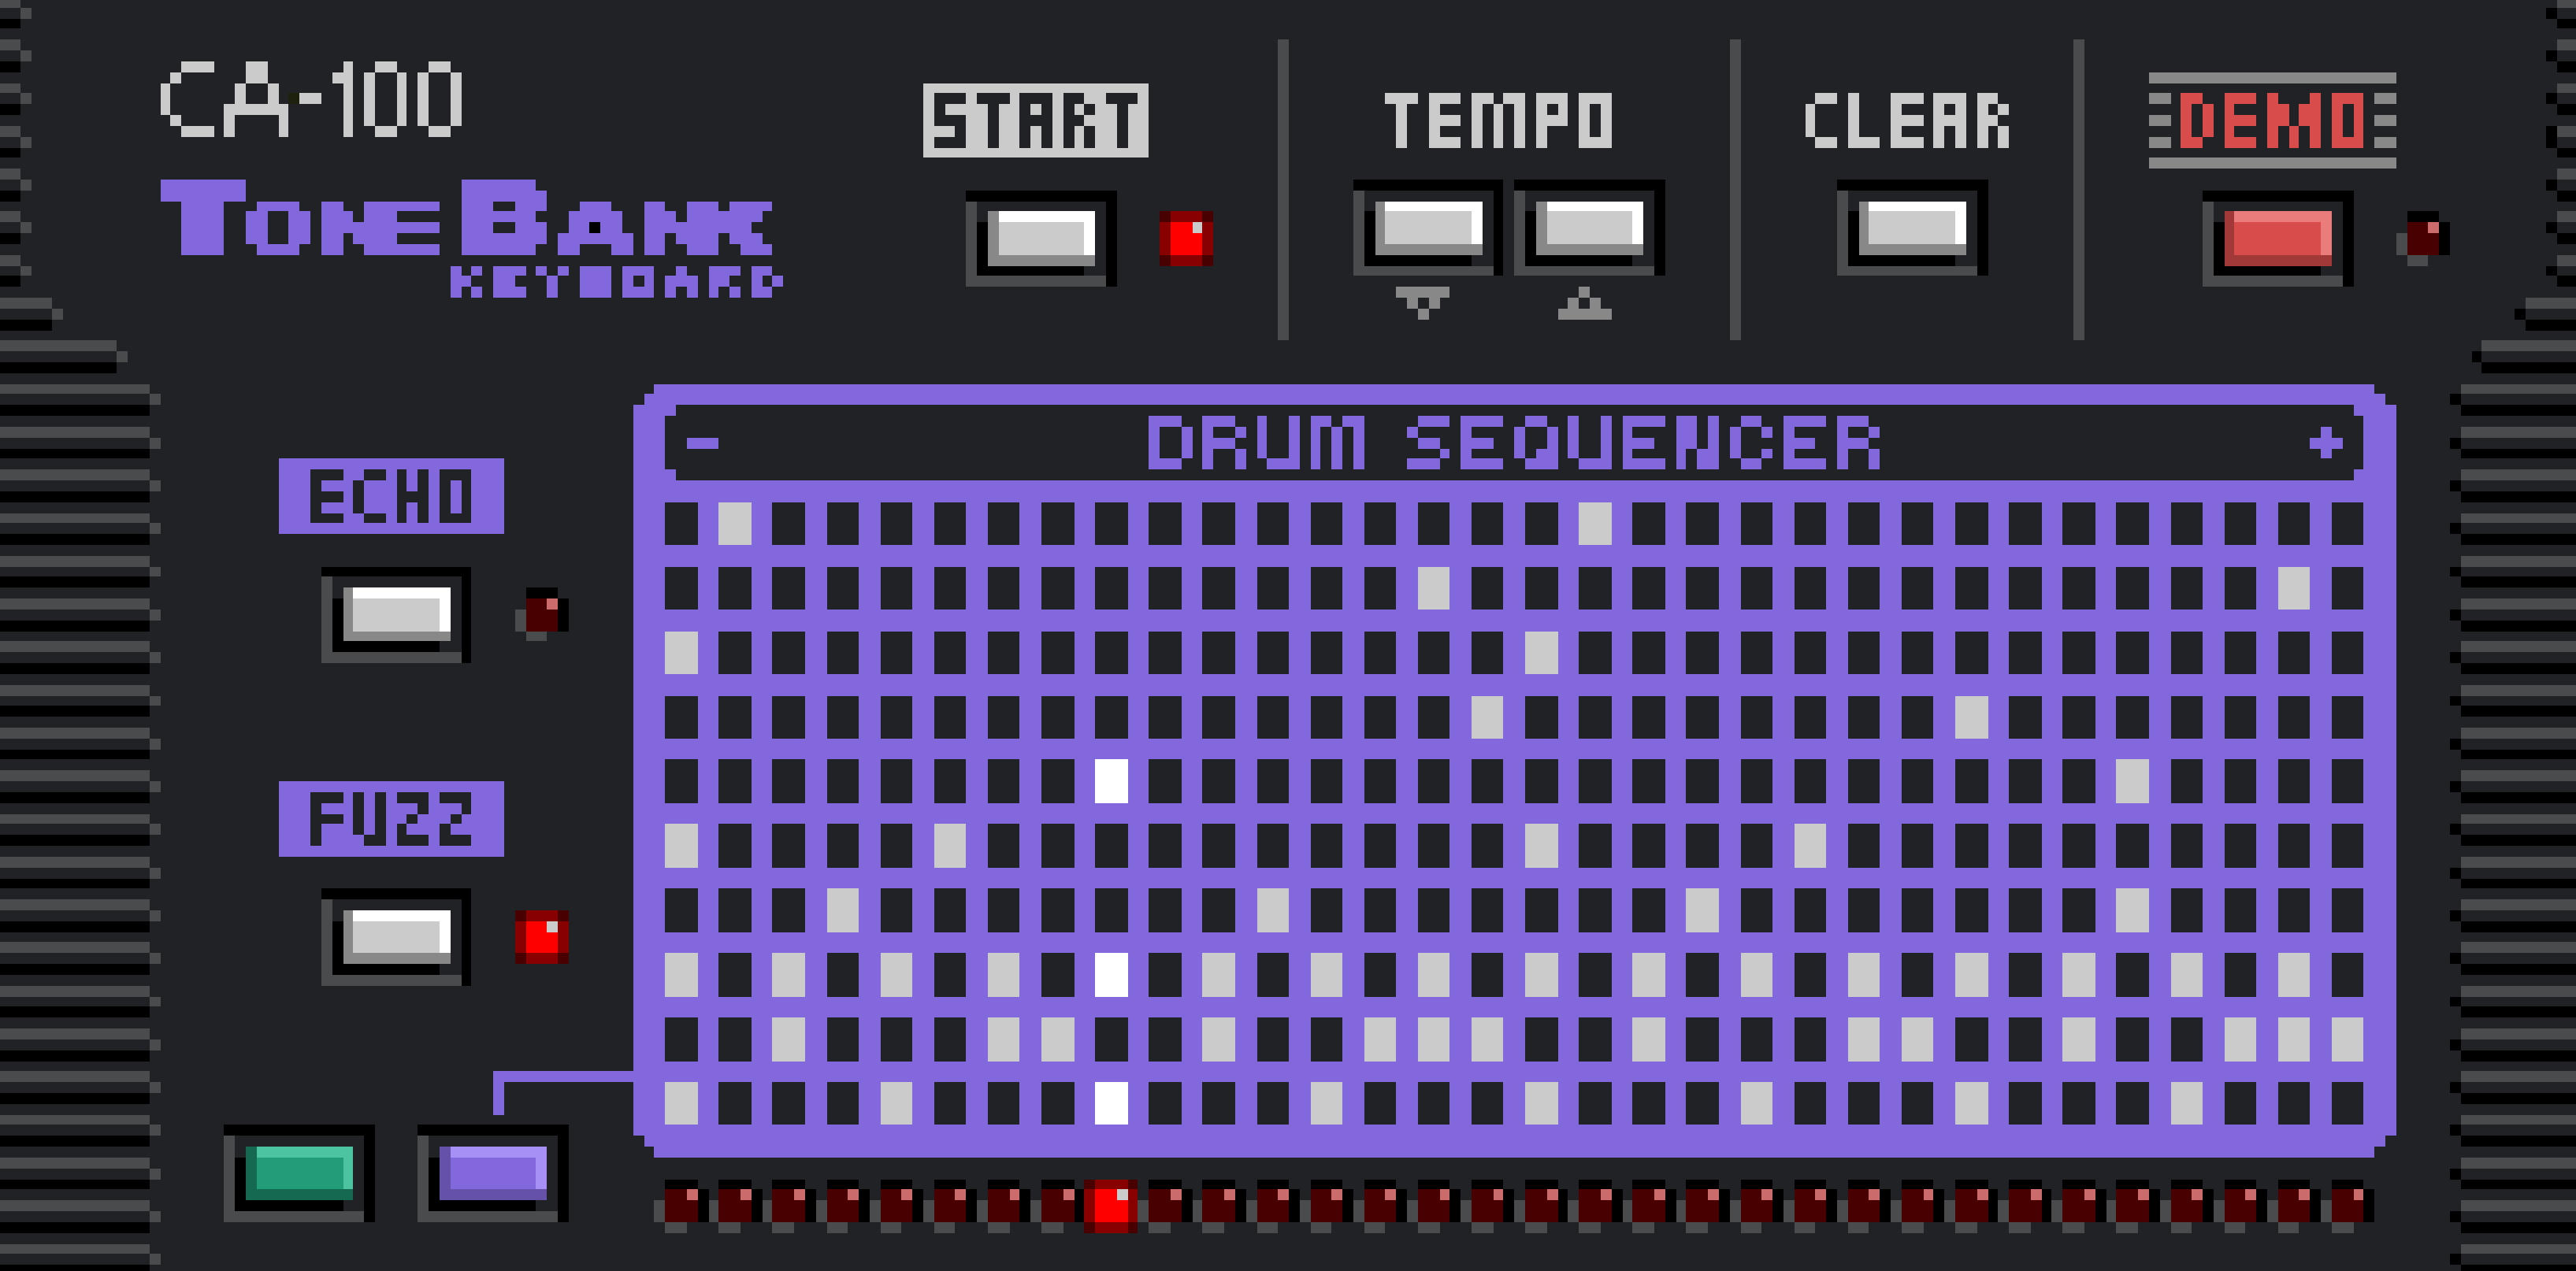 a screenshot of the simulator on the "drum sequencer" scene. It looks identical to the melody scene, but is in purple and black.